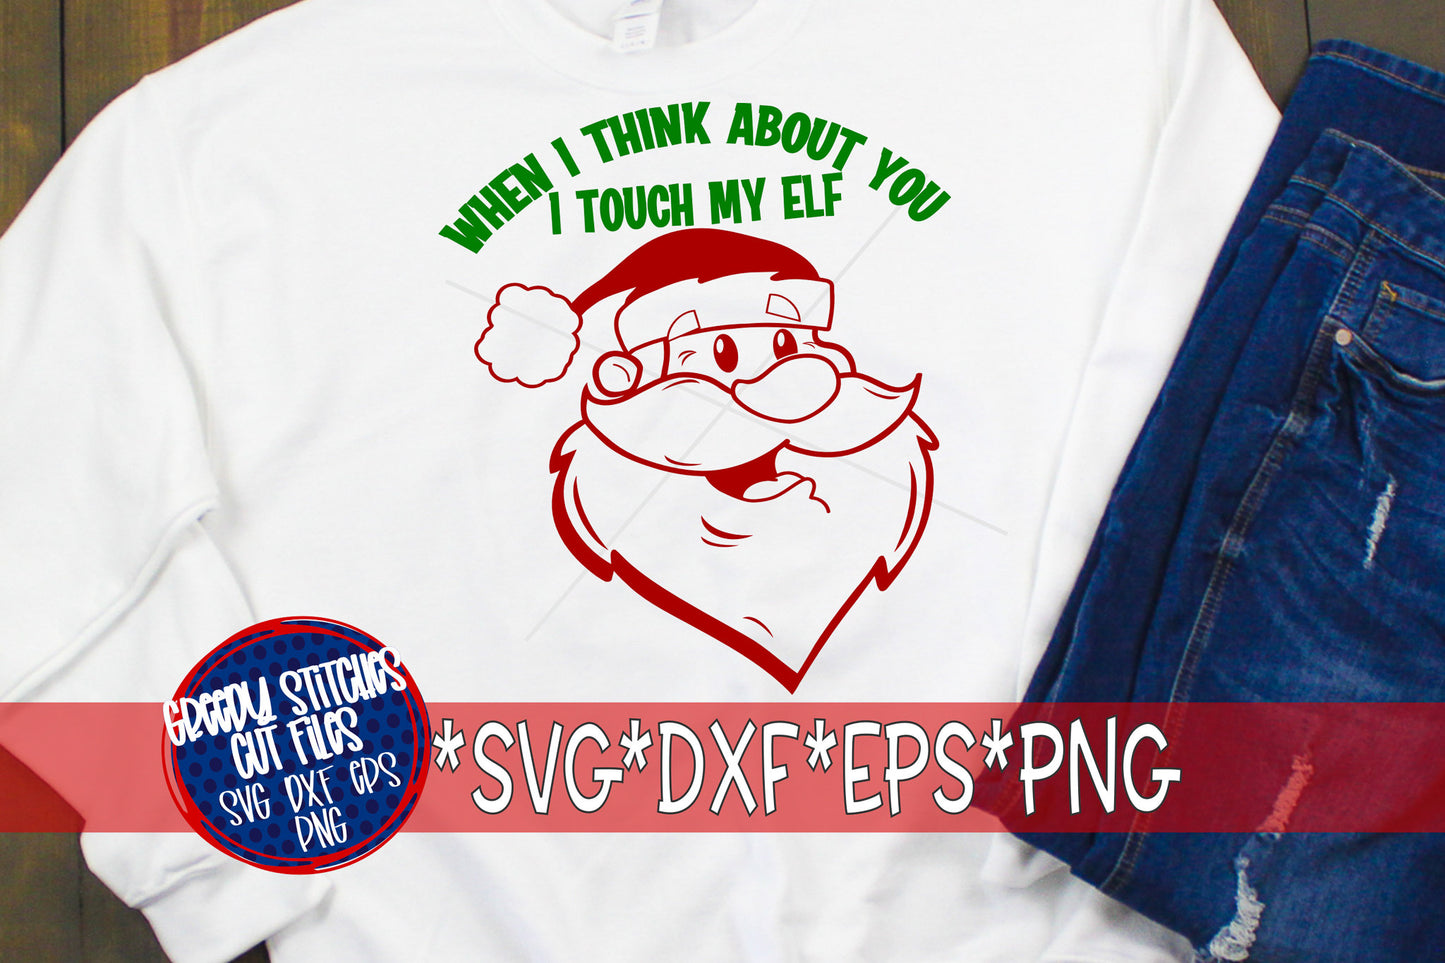 When I Think About You I Touch My Elf svg, dxf, eps, png. Christmas SvG | Santa Claus SvG | Santa DxF | Elf SVG | Instant Download Cut File